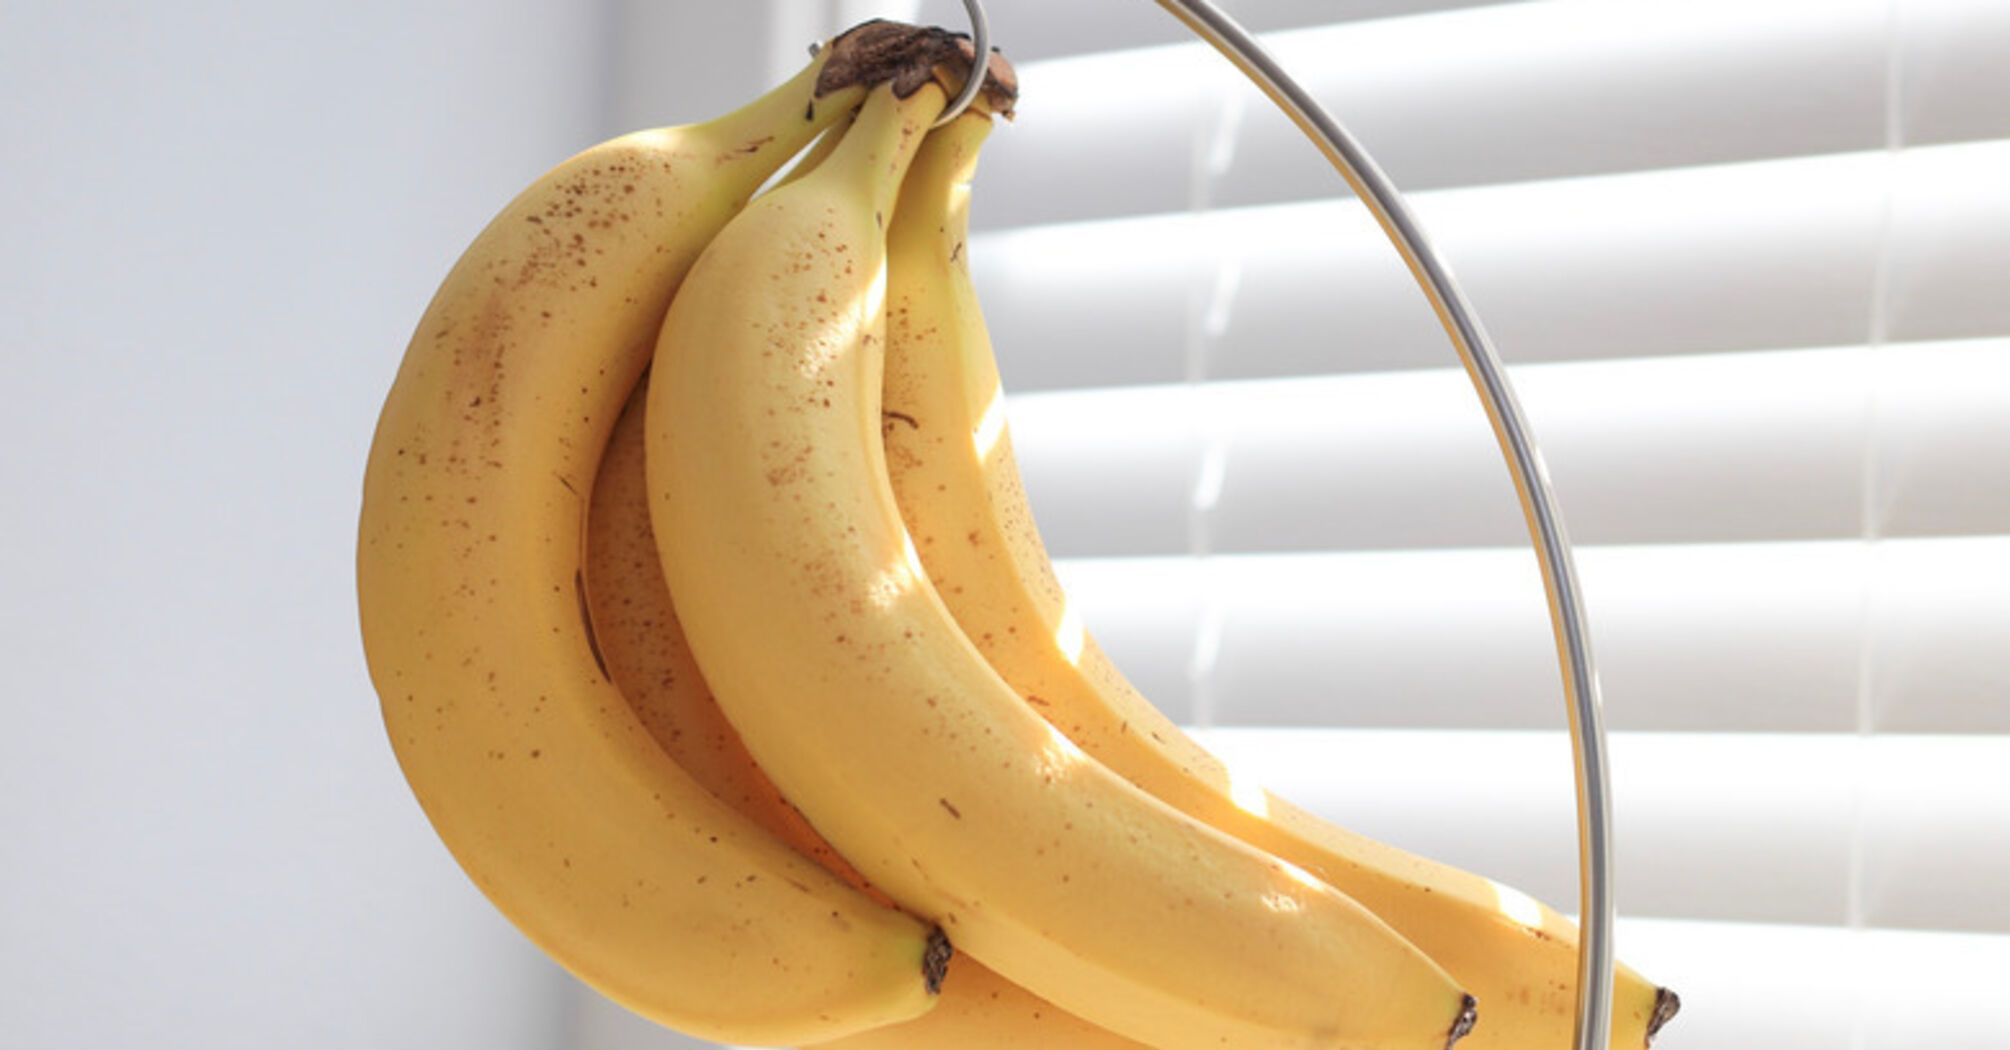 How to keep bananas fresh for the longest time